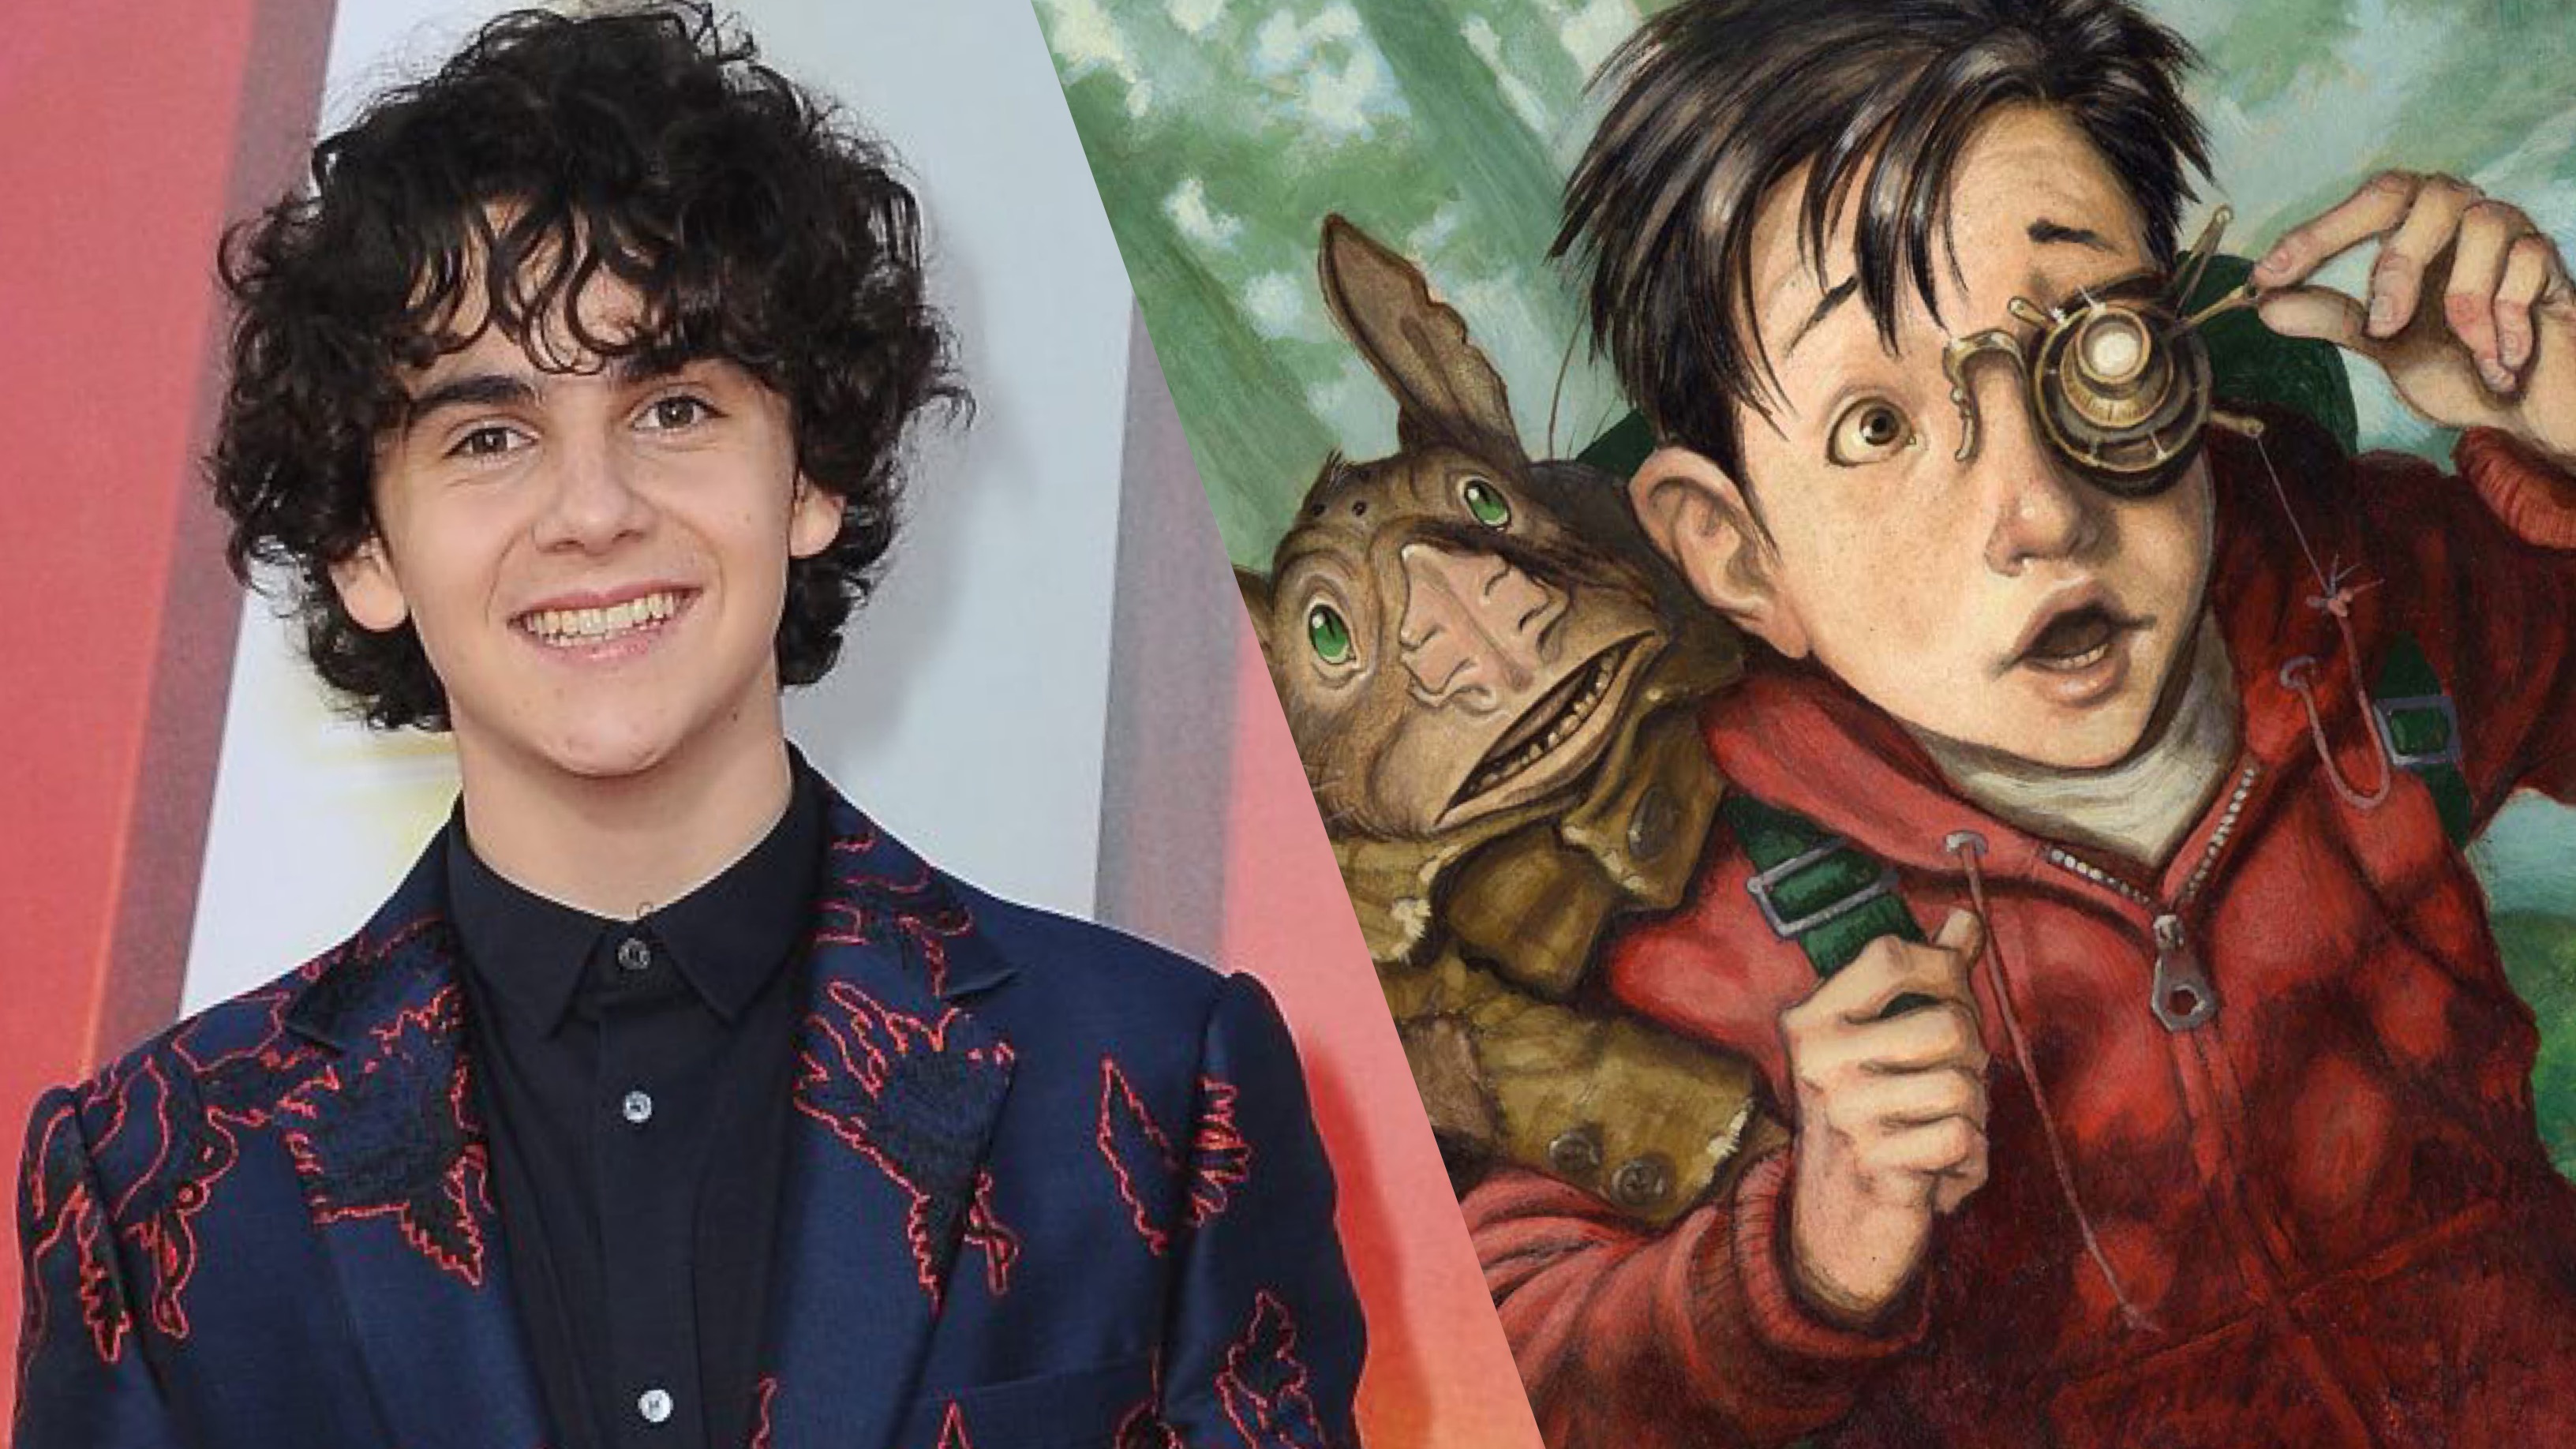 Jack Dylan Grazer Joins ‘The Spiderwick Chronicles’ at Disney+